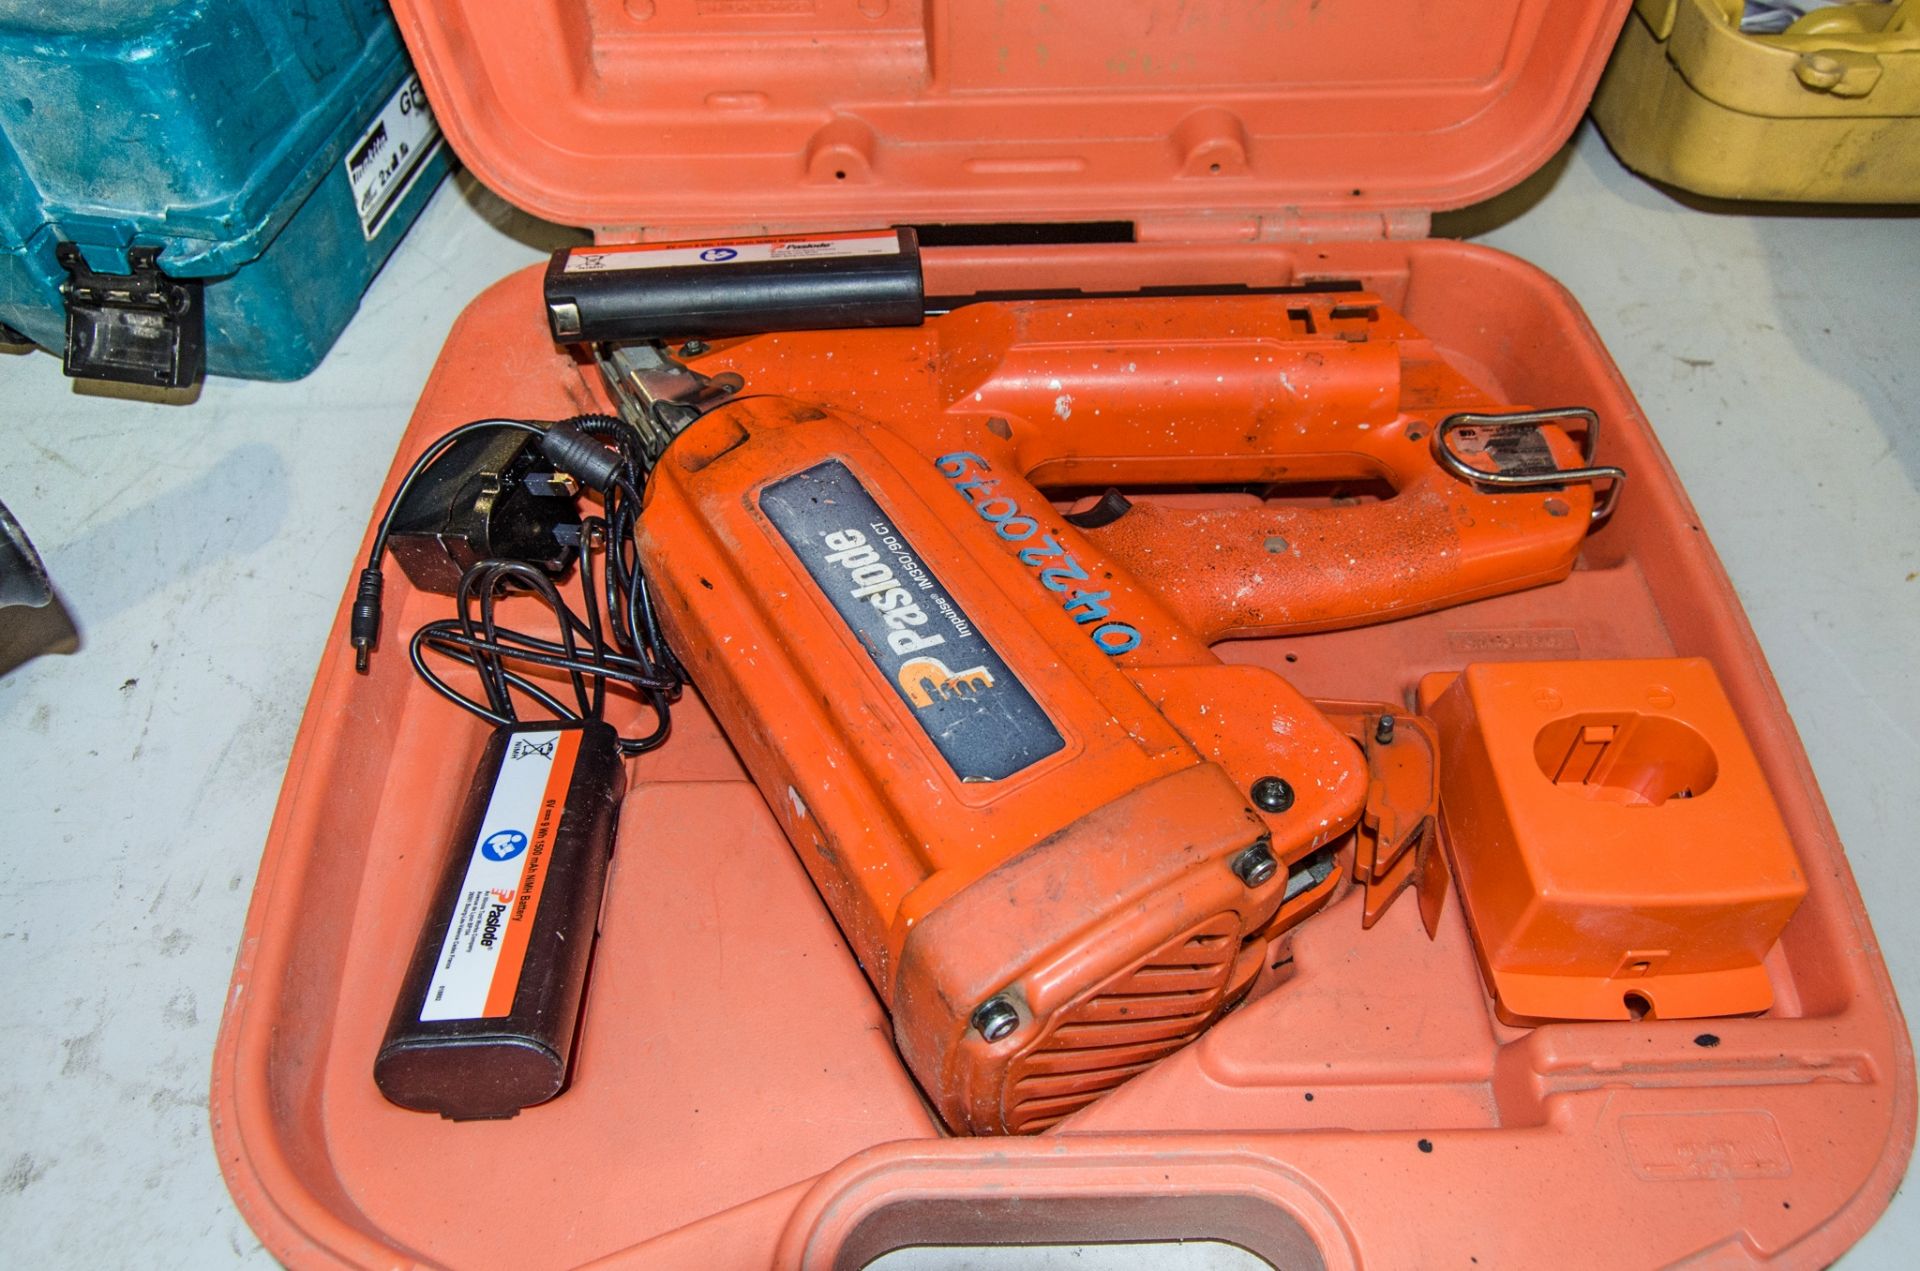 Paslode IM350/90 CT nail gun c/w 2 batteries, charger and carry case 04220079